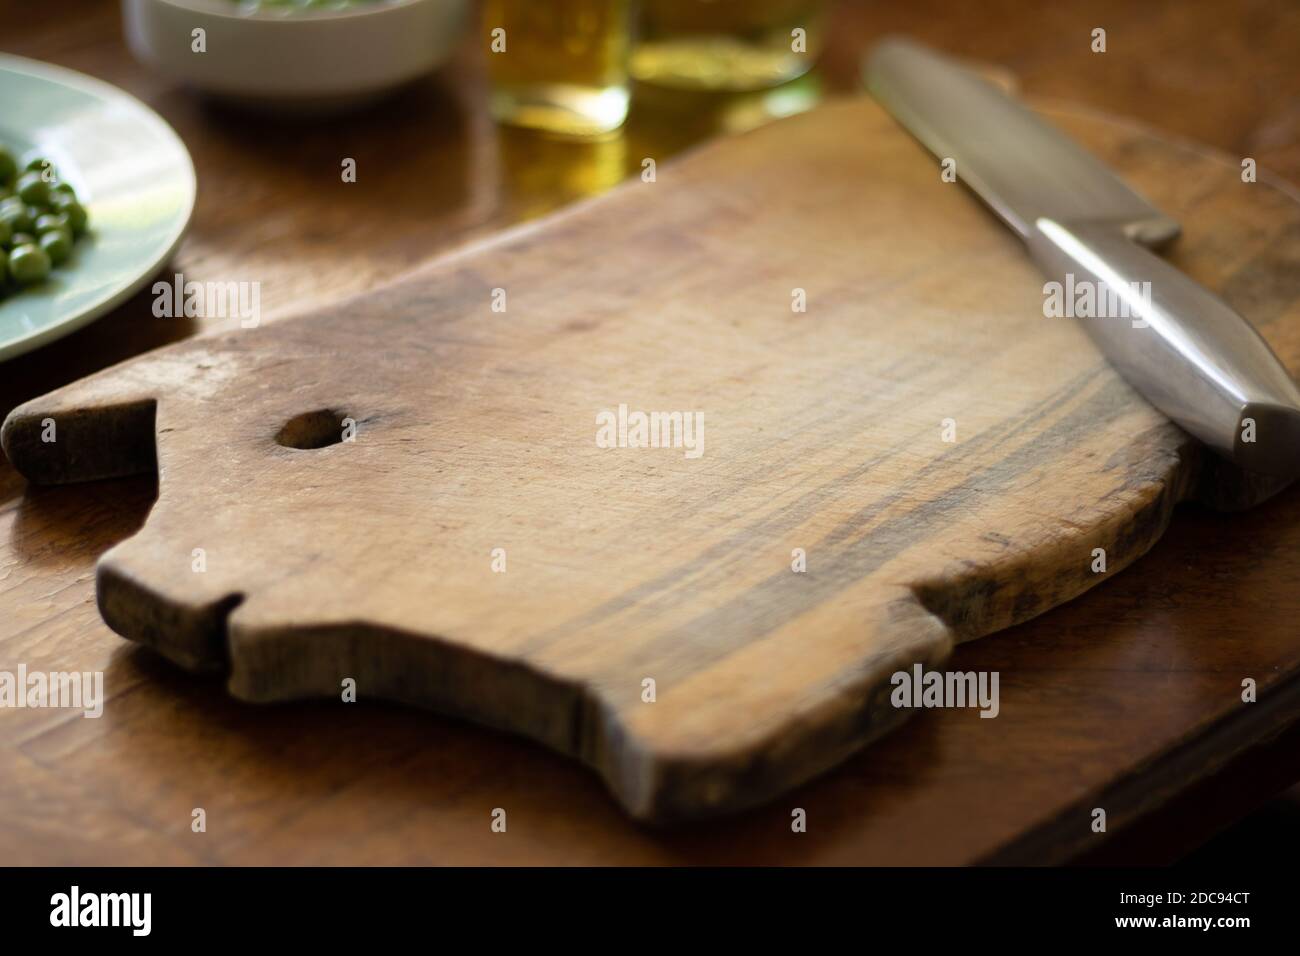 wooden cutting board shaped like a piggy with a kitchen knife, a plate with green peas and a bottle of oil on a wooden table Stock Photo